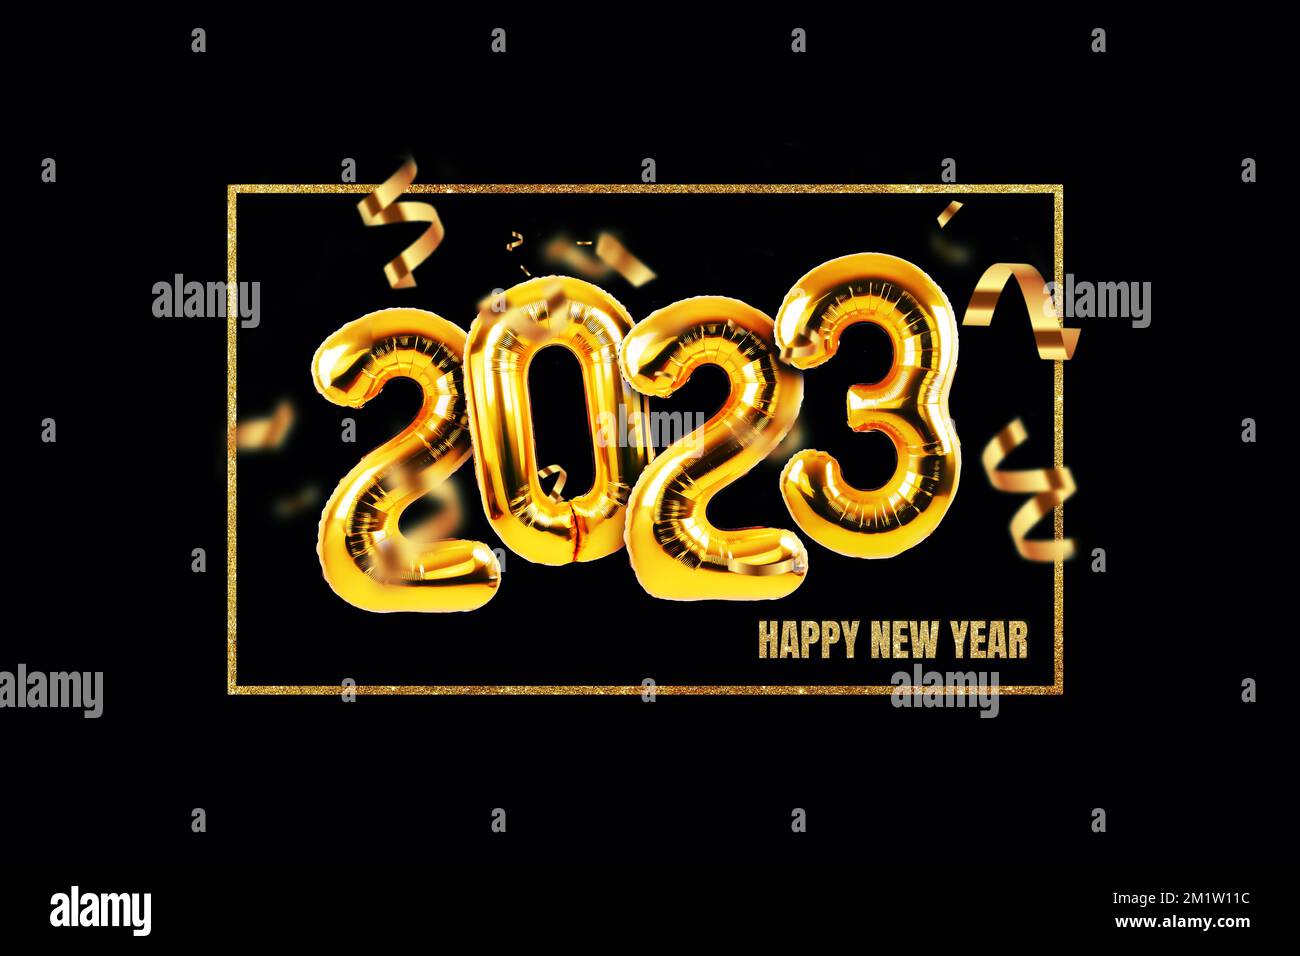 Happy new year 2023 metallic gold foil balloons with confetti on a black background. Golden helium balloons number 2023 New Year. Stock Photo